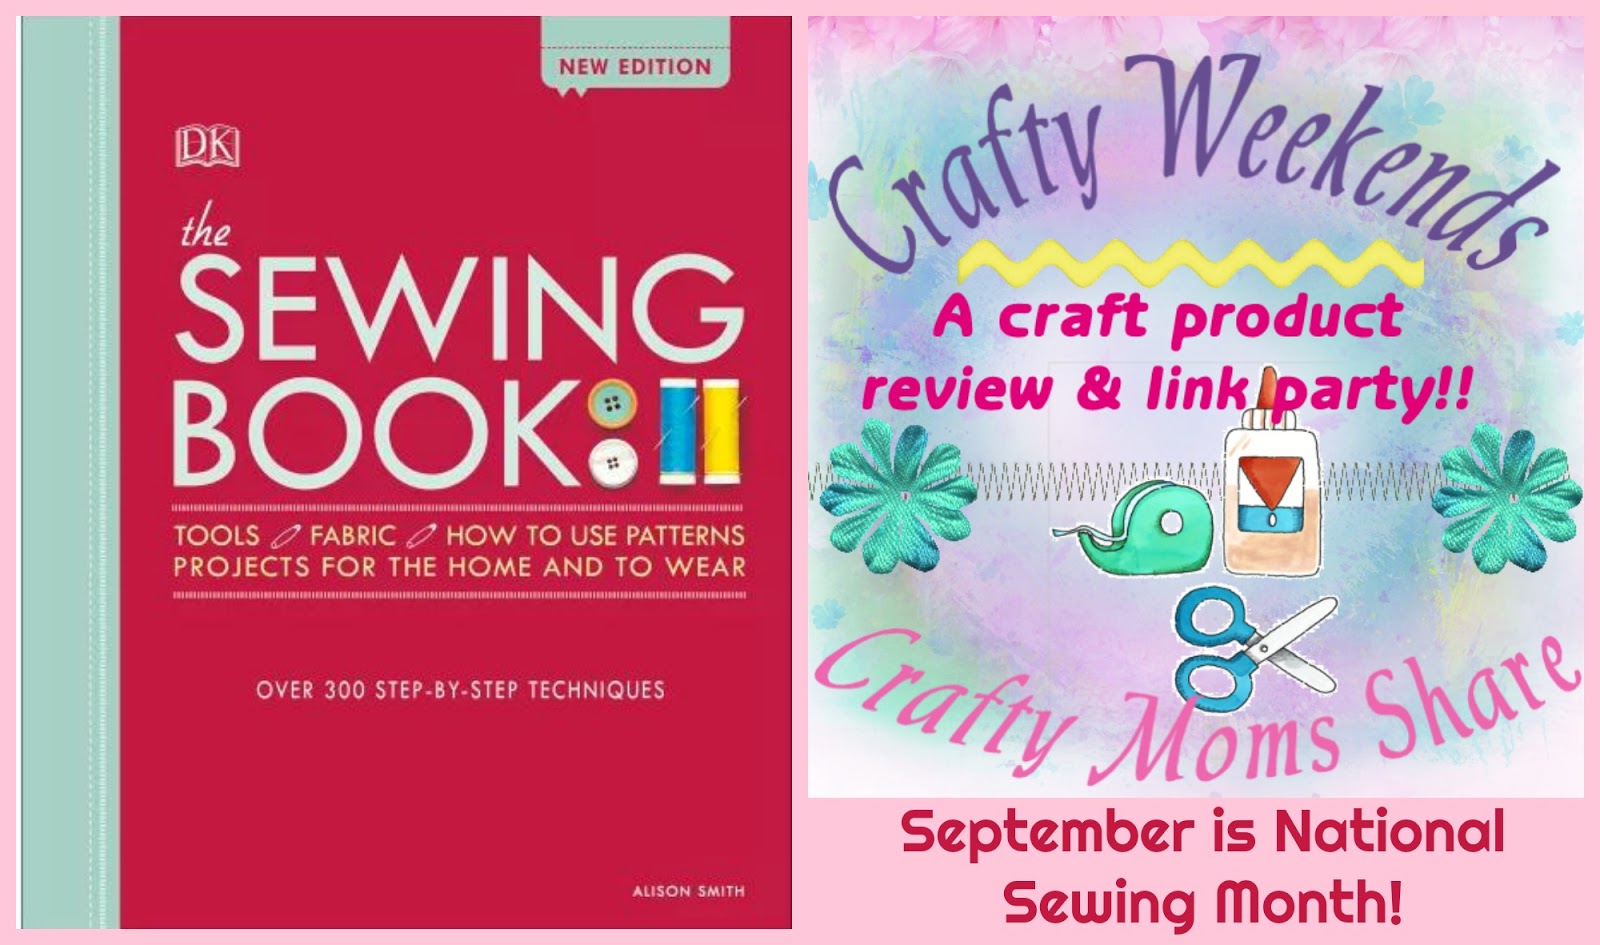 Crafty Moms Share: The Sewing Book -- a Crafty Weekends Review & Link Party  #NationalSewingMonth